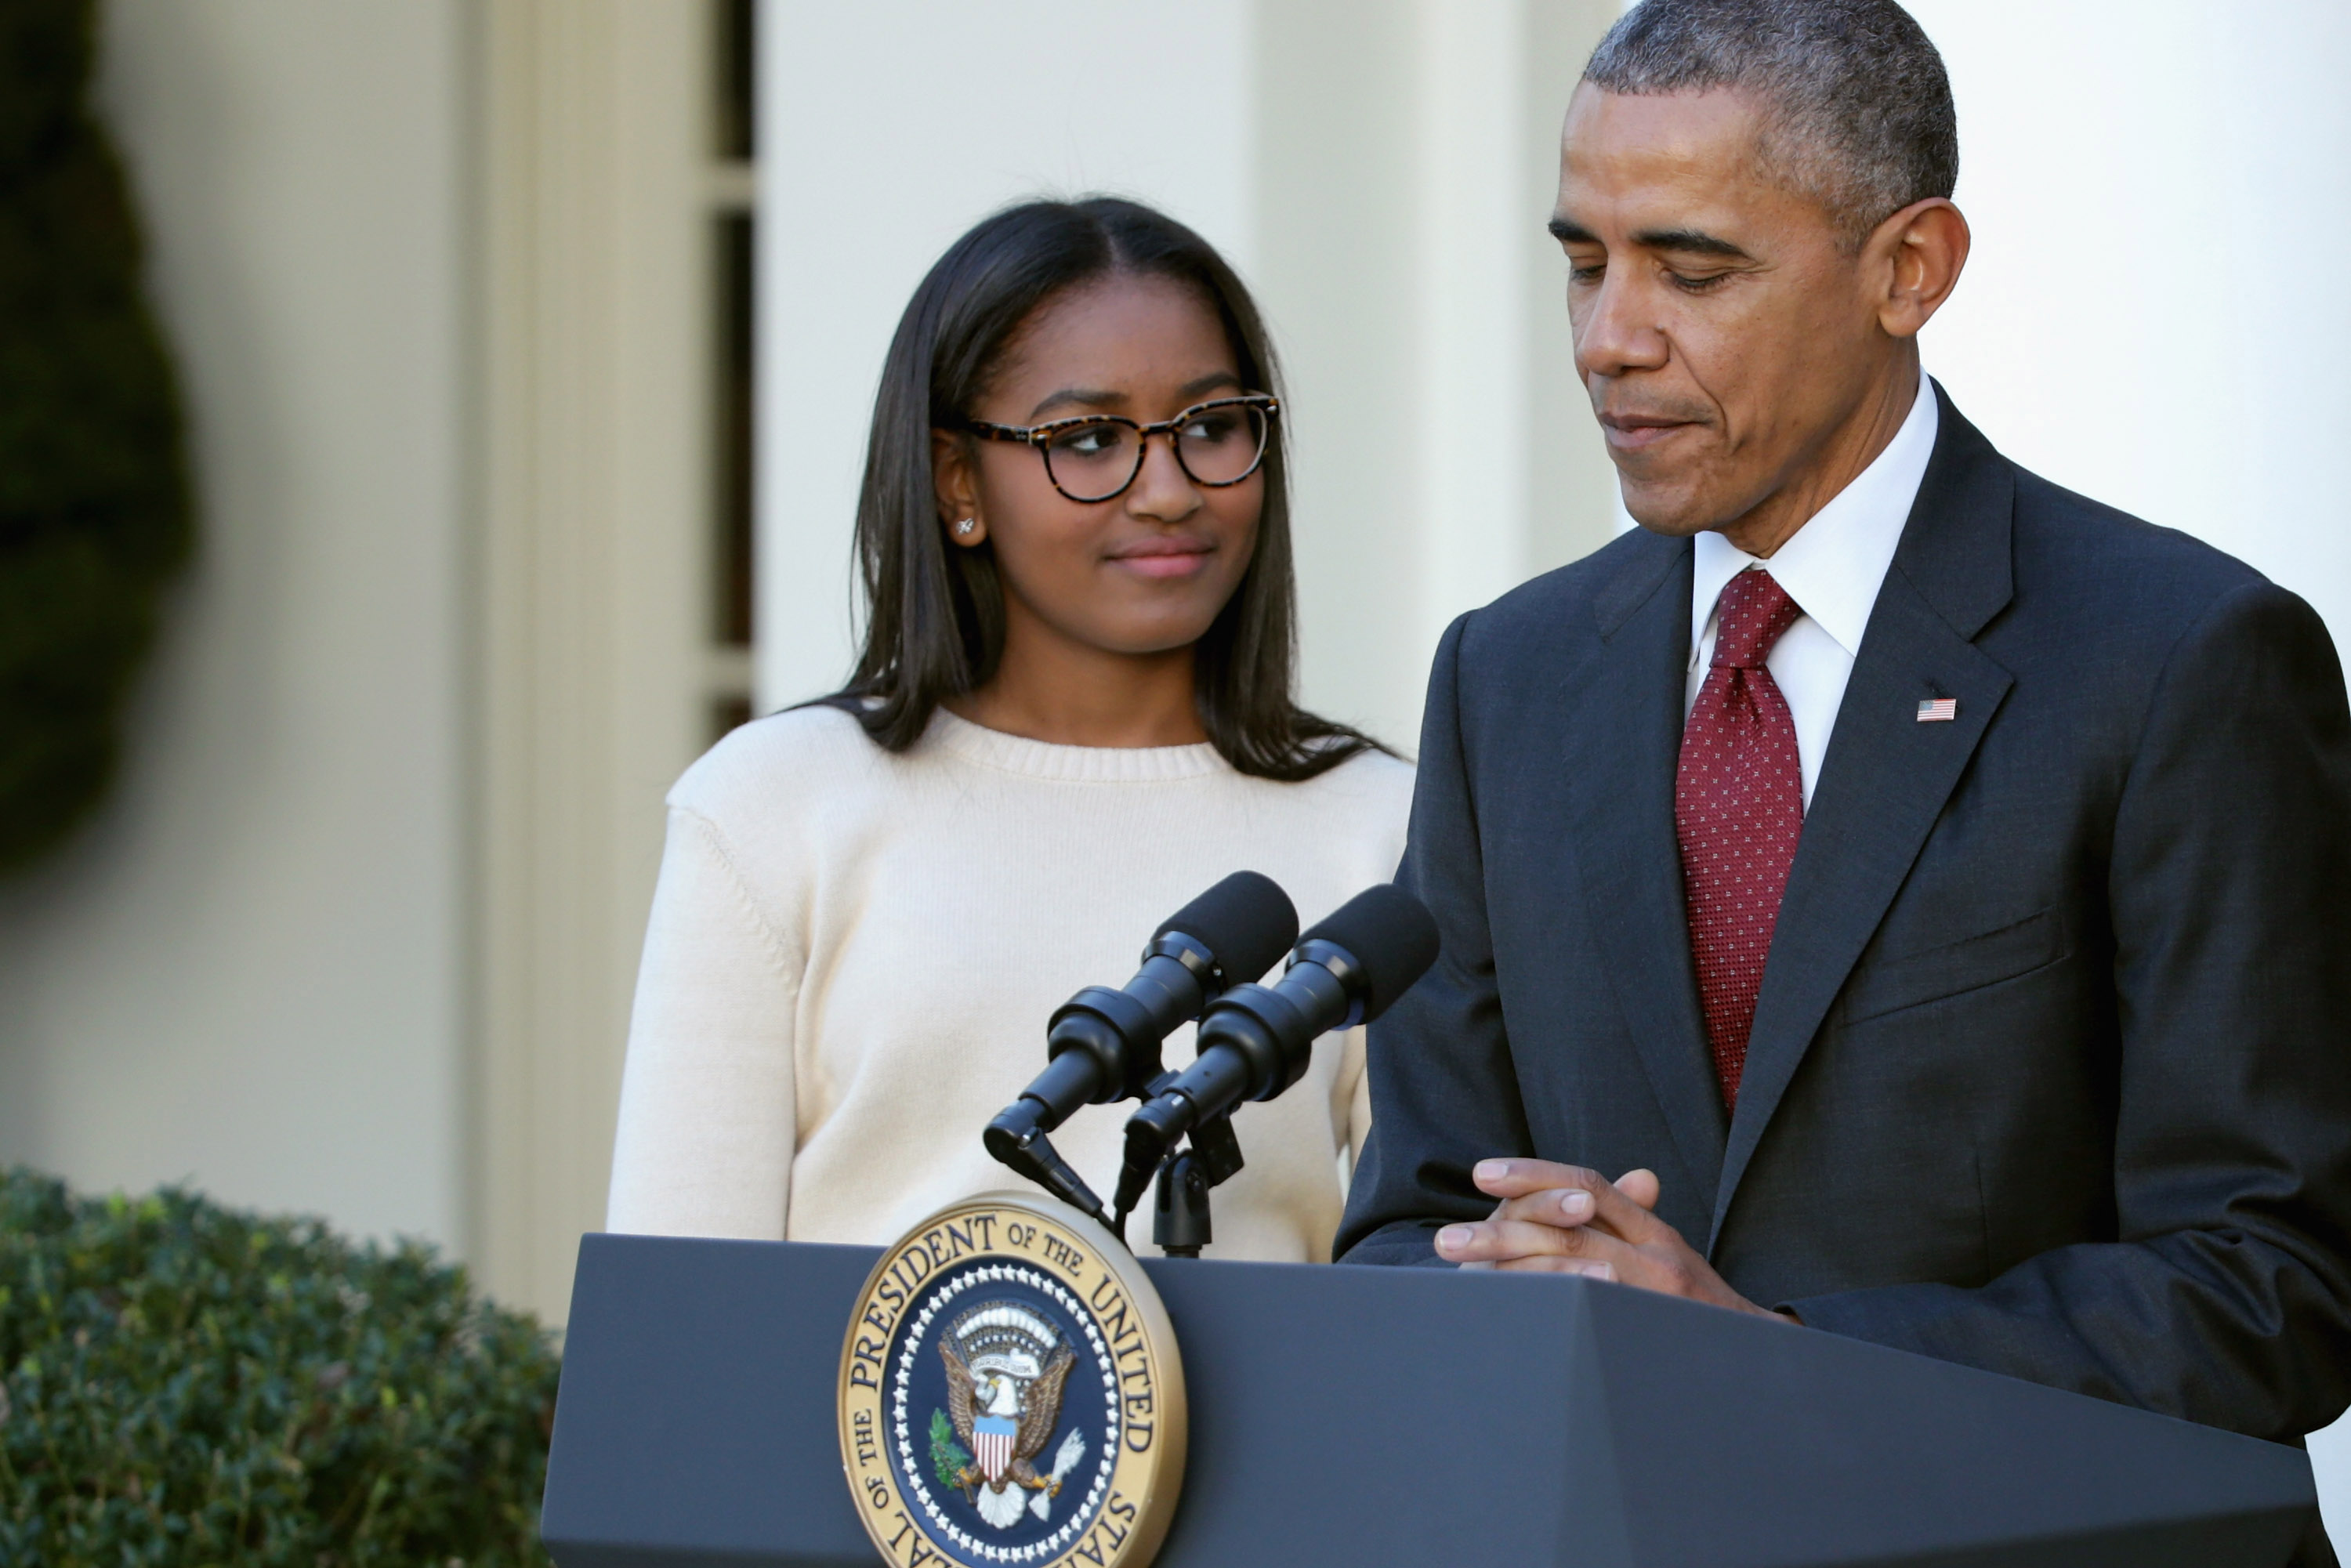 WASHINGTON, DC - NOVEMBER 25: U.S. President Barack Obama (R) and his daughter Sasha Obama participate in the turkey pardoning ceremony in the Rose Garden at the White House November 25, 2015 in Washington, DC. In a tradition dating back to 1947, the president pardons a turkey, sparing the tom -- and his alternate -- from becoming a Thanksgiving Day feast. This year, Americans were asked to choose which of two turkeys would be pardoned and to cast their votes on Twitter. (Photo by Chip Somodevilla/Getty Images)